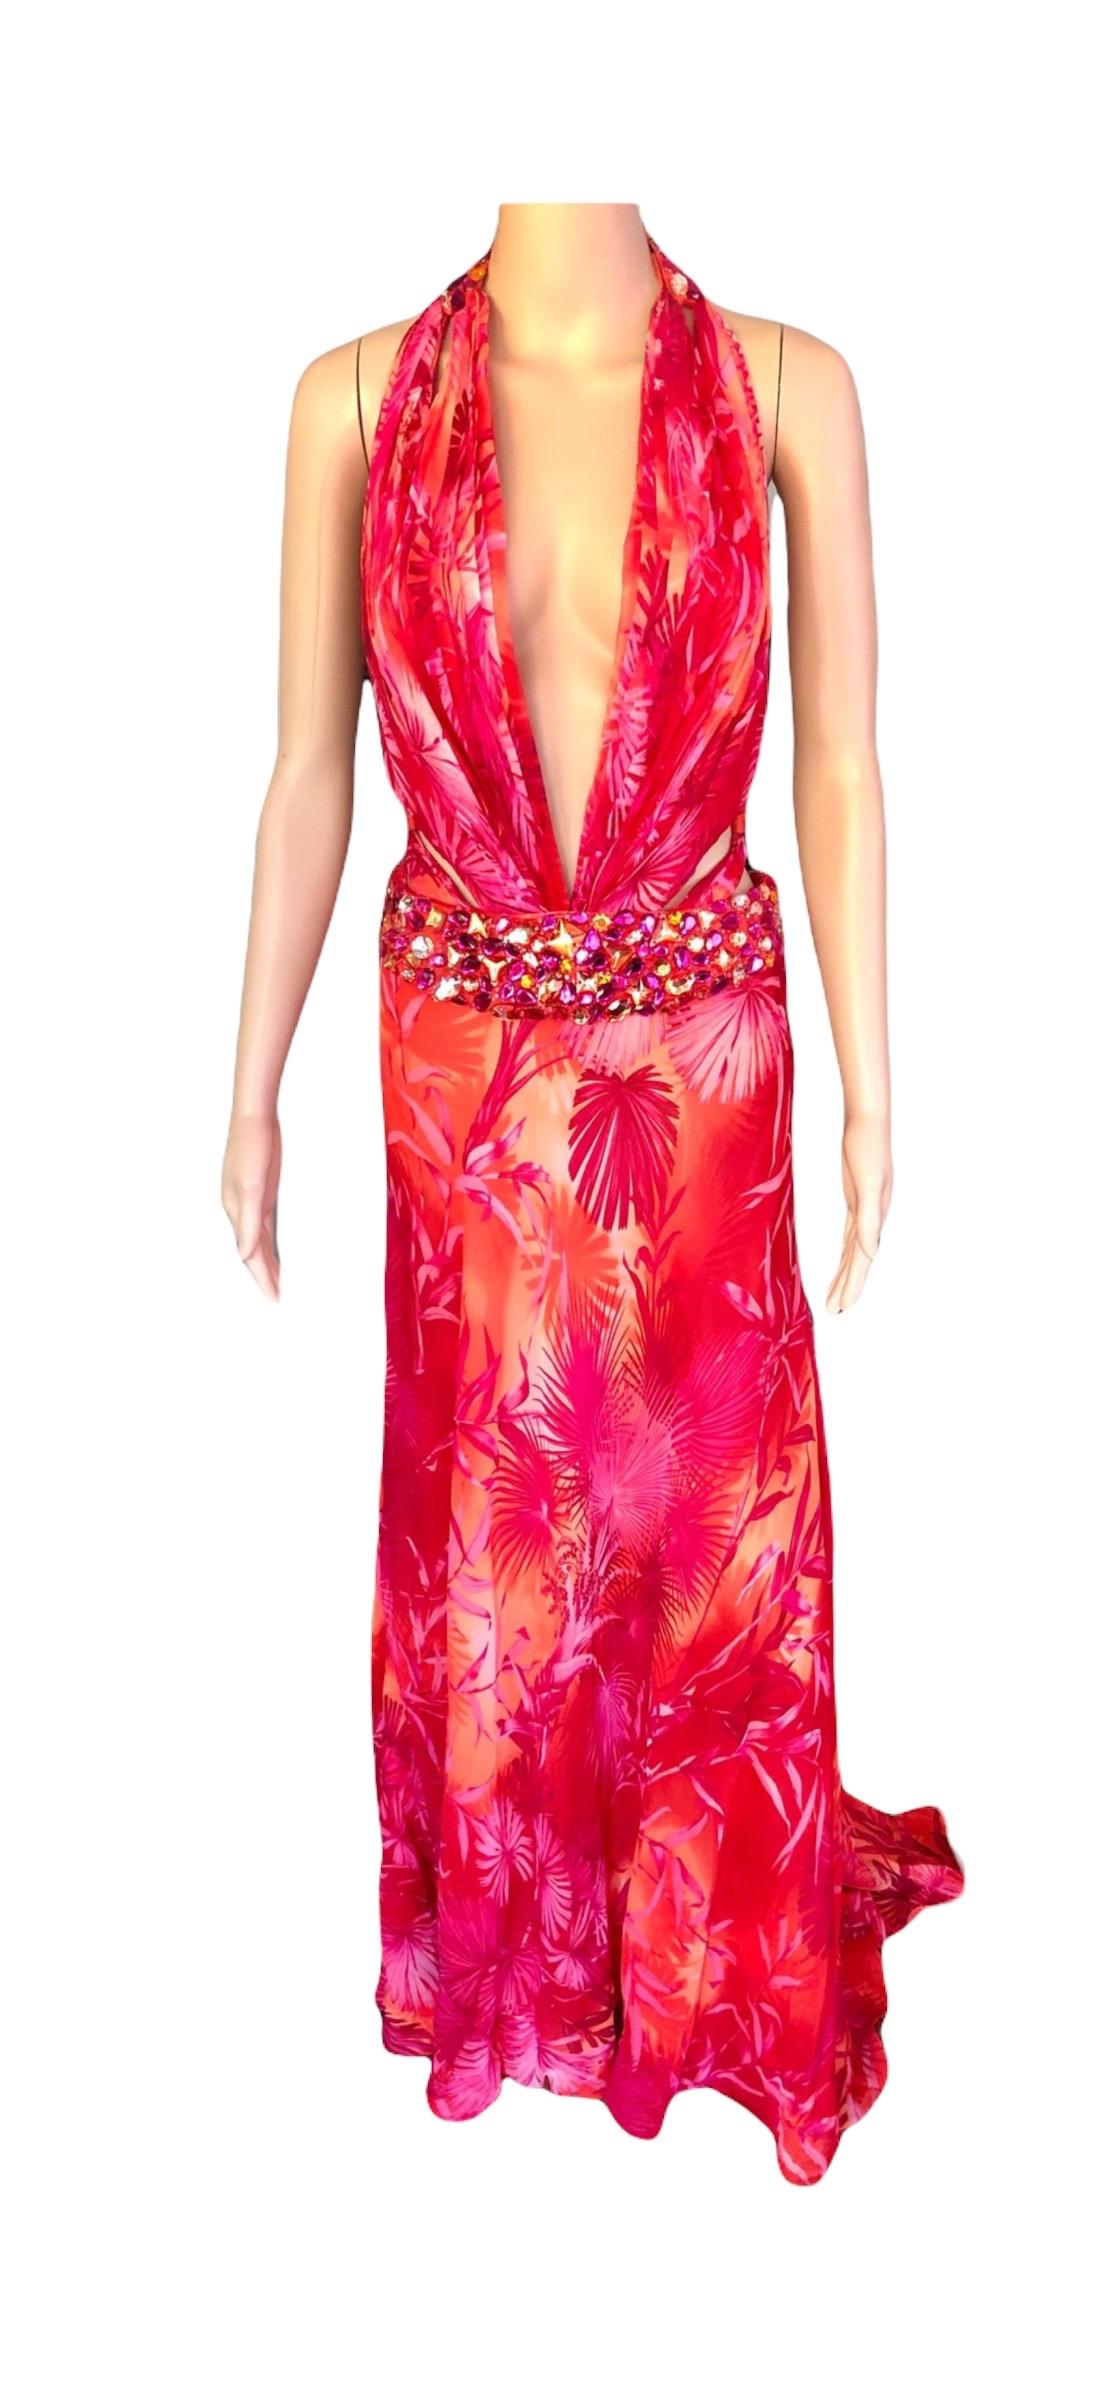 Gianni Versace S/S 2000 Runway Embellished Jungle Print Evening Dress Gown 8